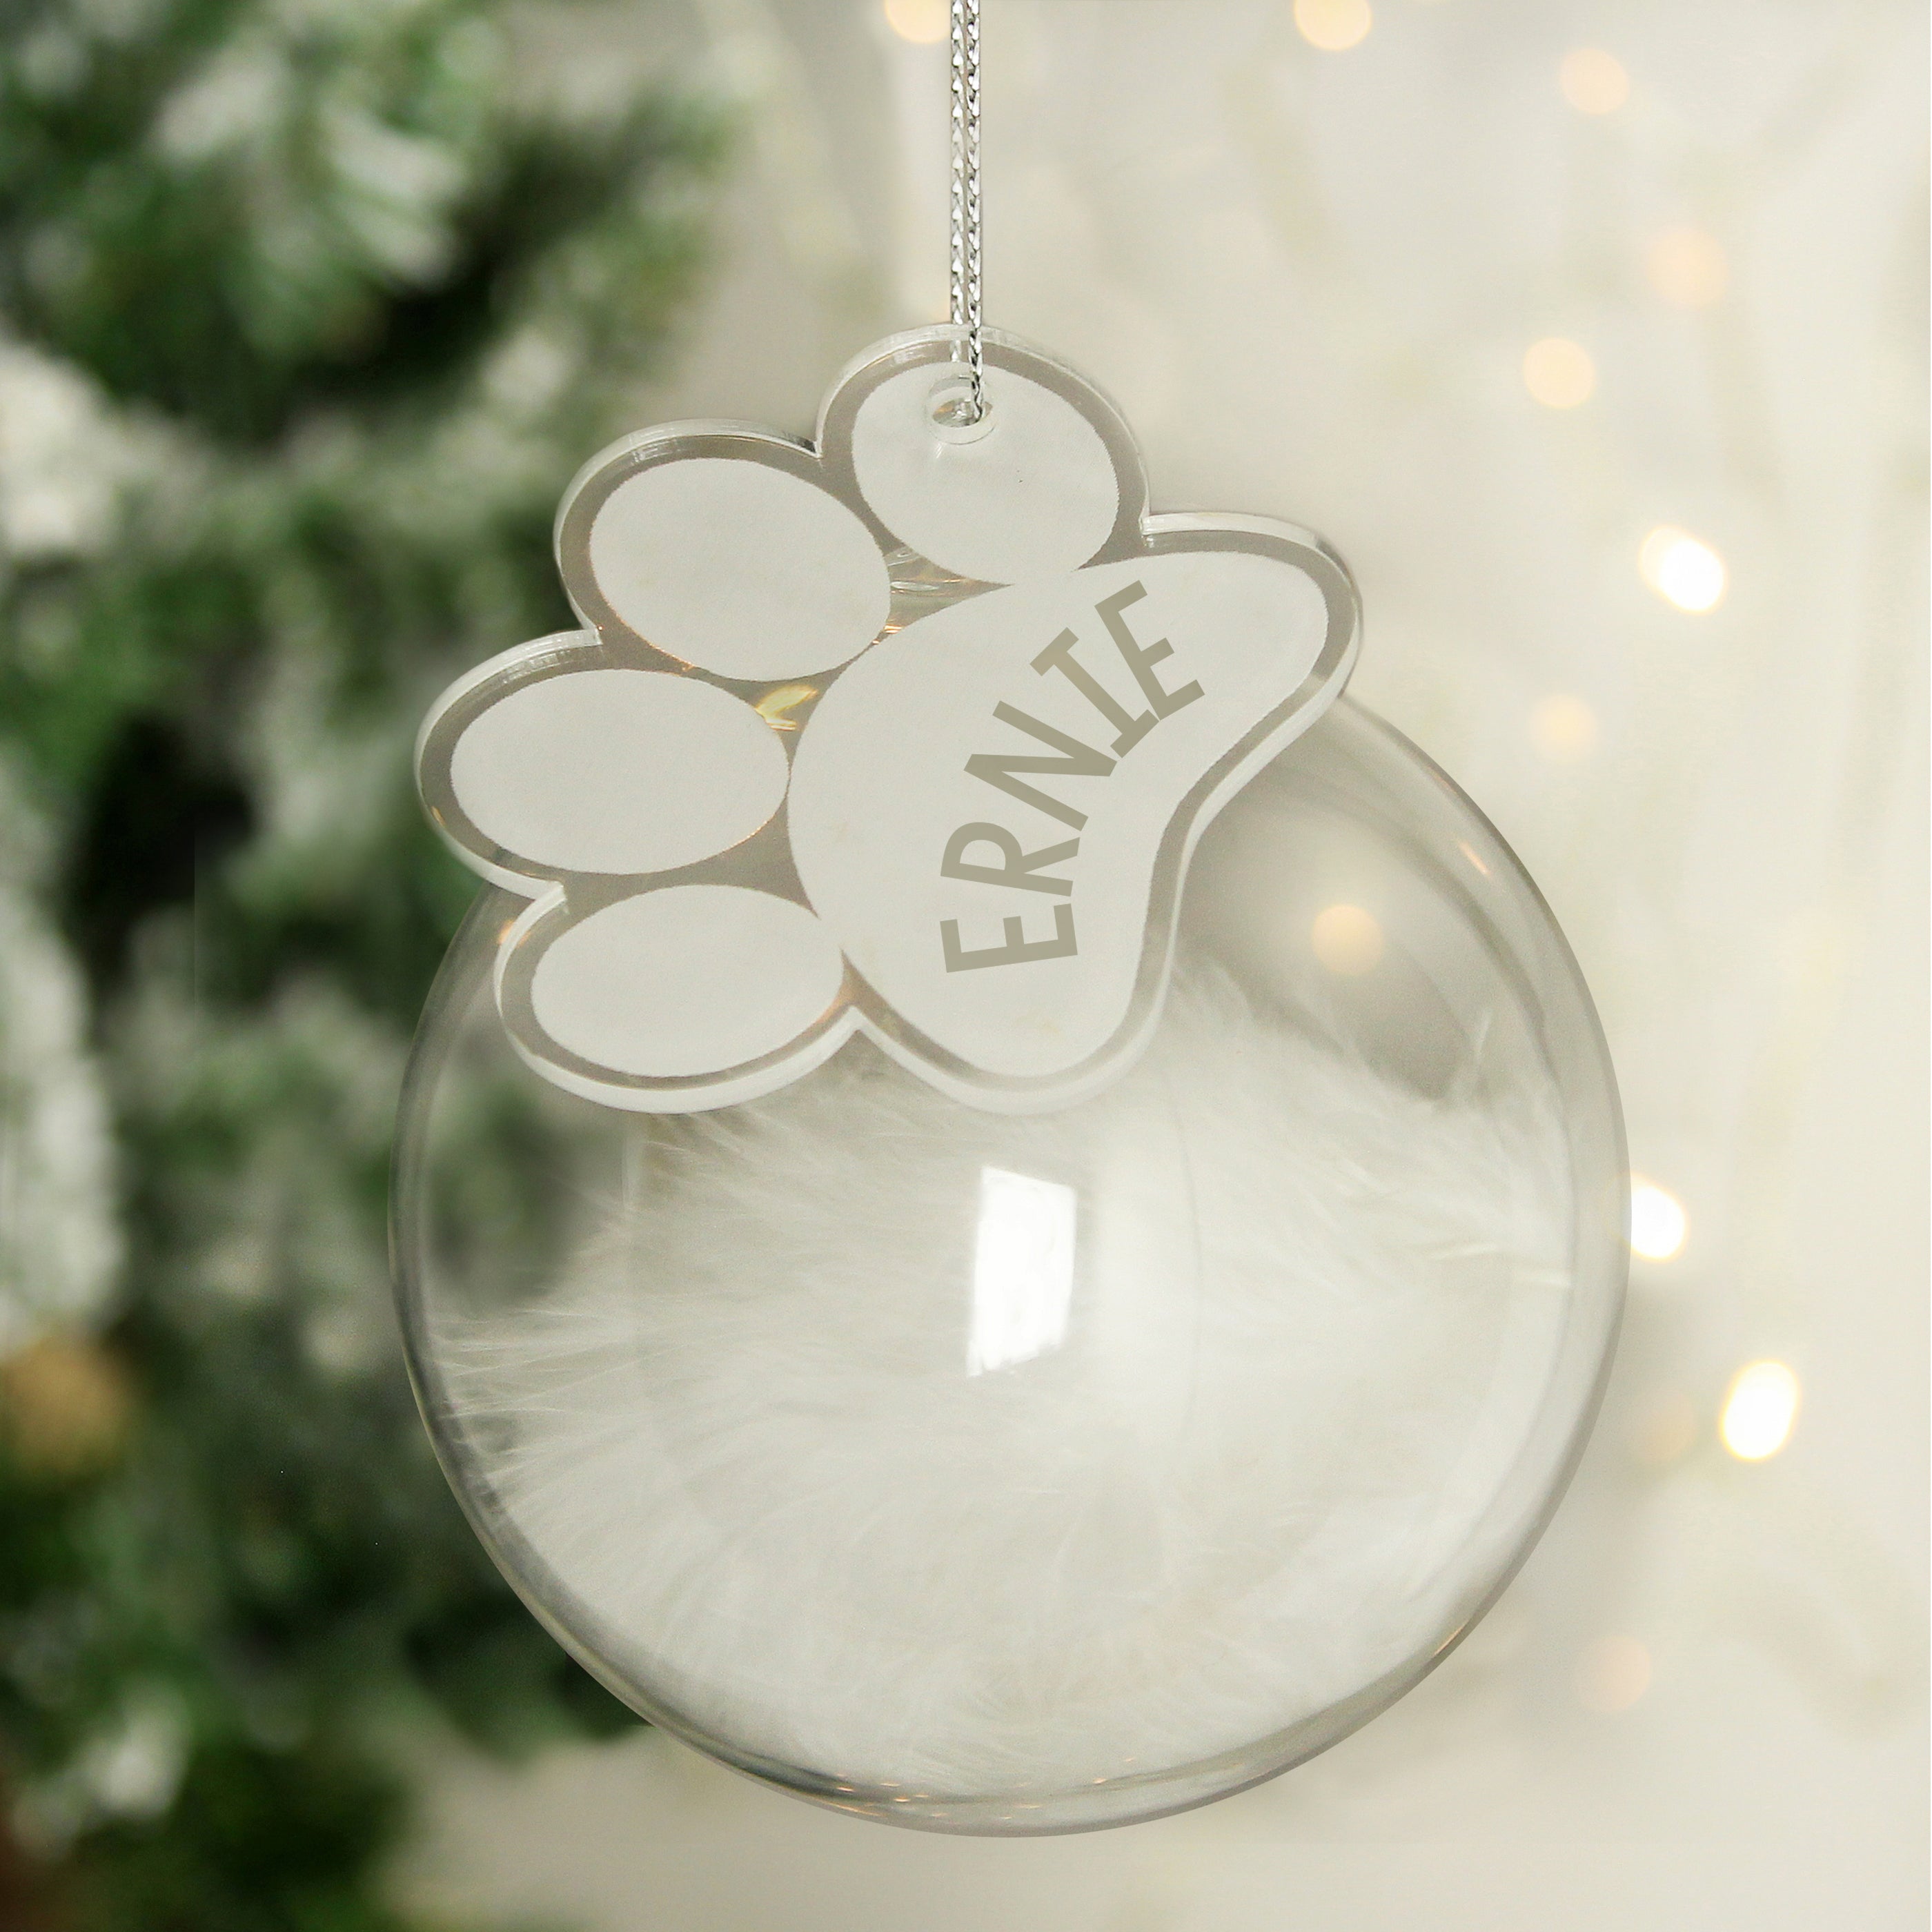 Personalised Pets White Feather Glass Bauble With Paw Print Tag By Gift Original